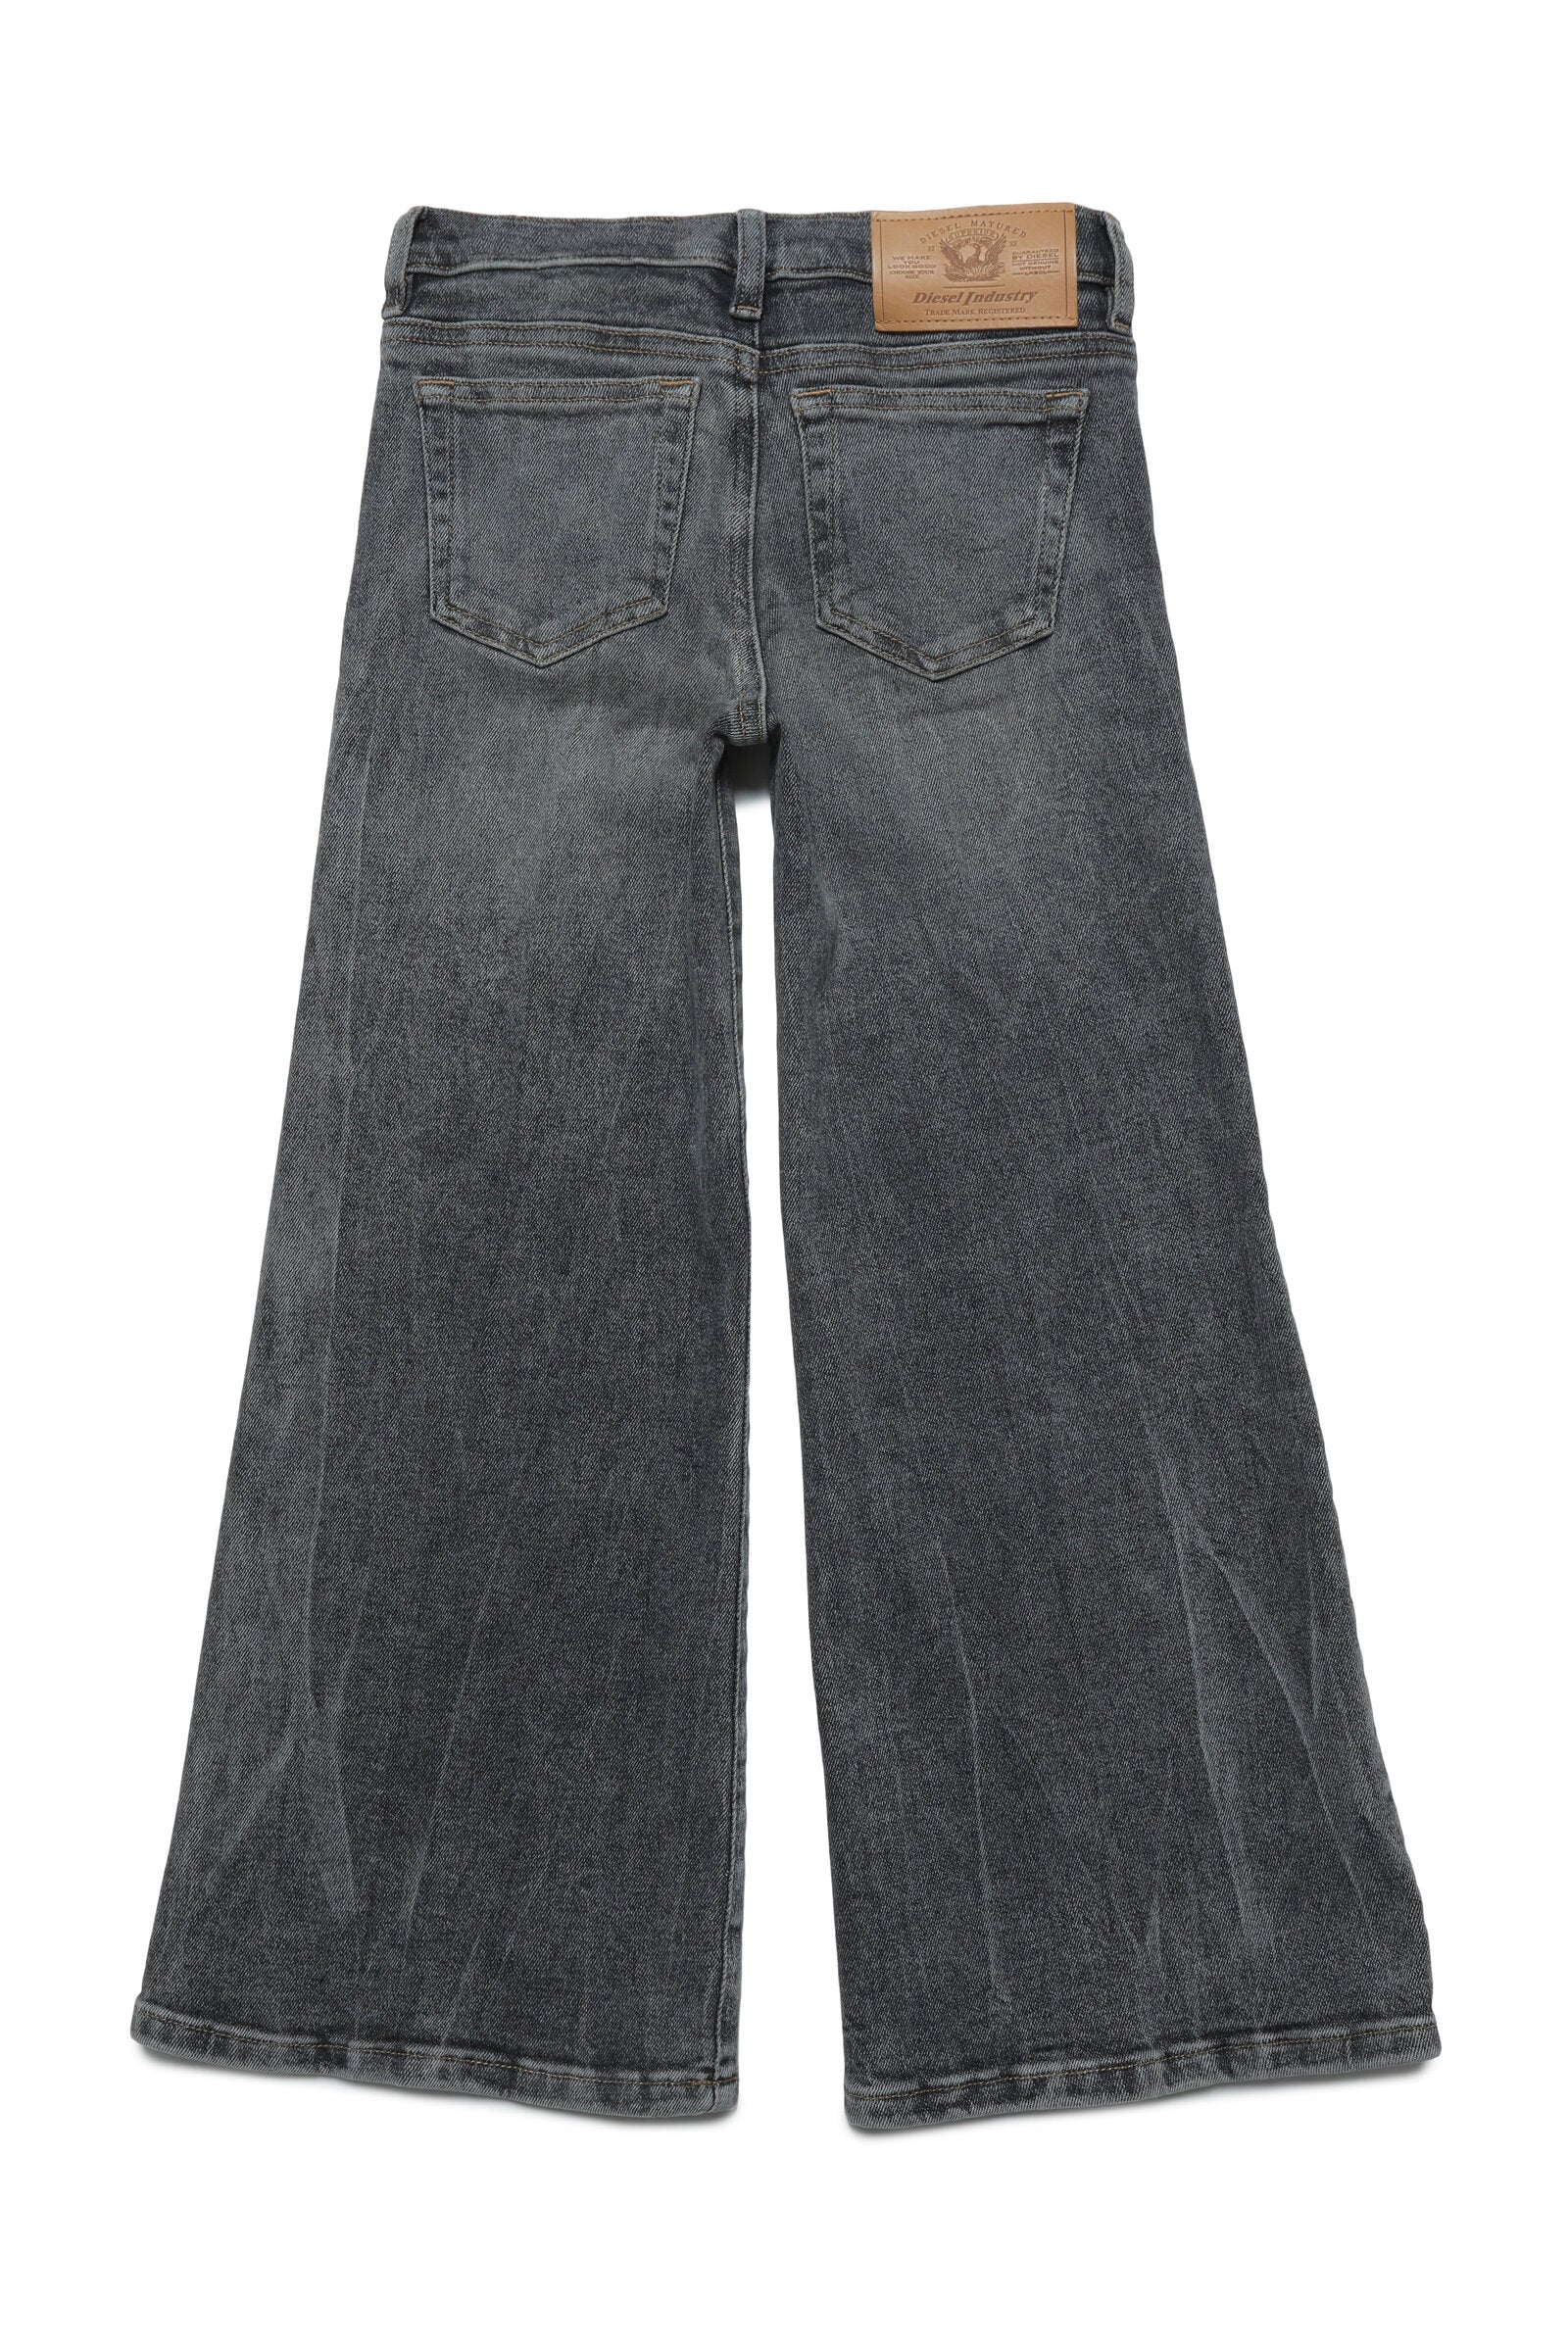 Jeans 1978 flare gray marbled effect